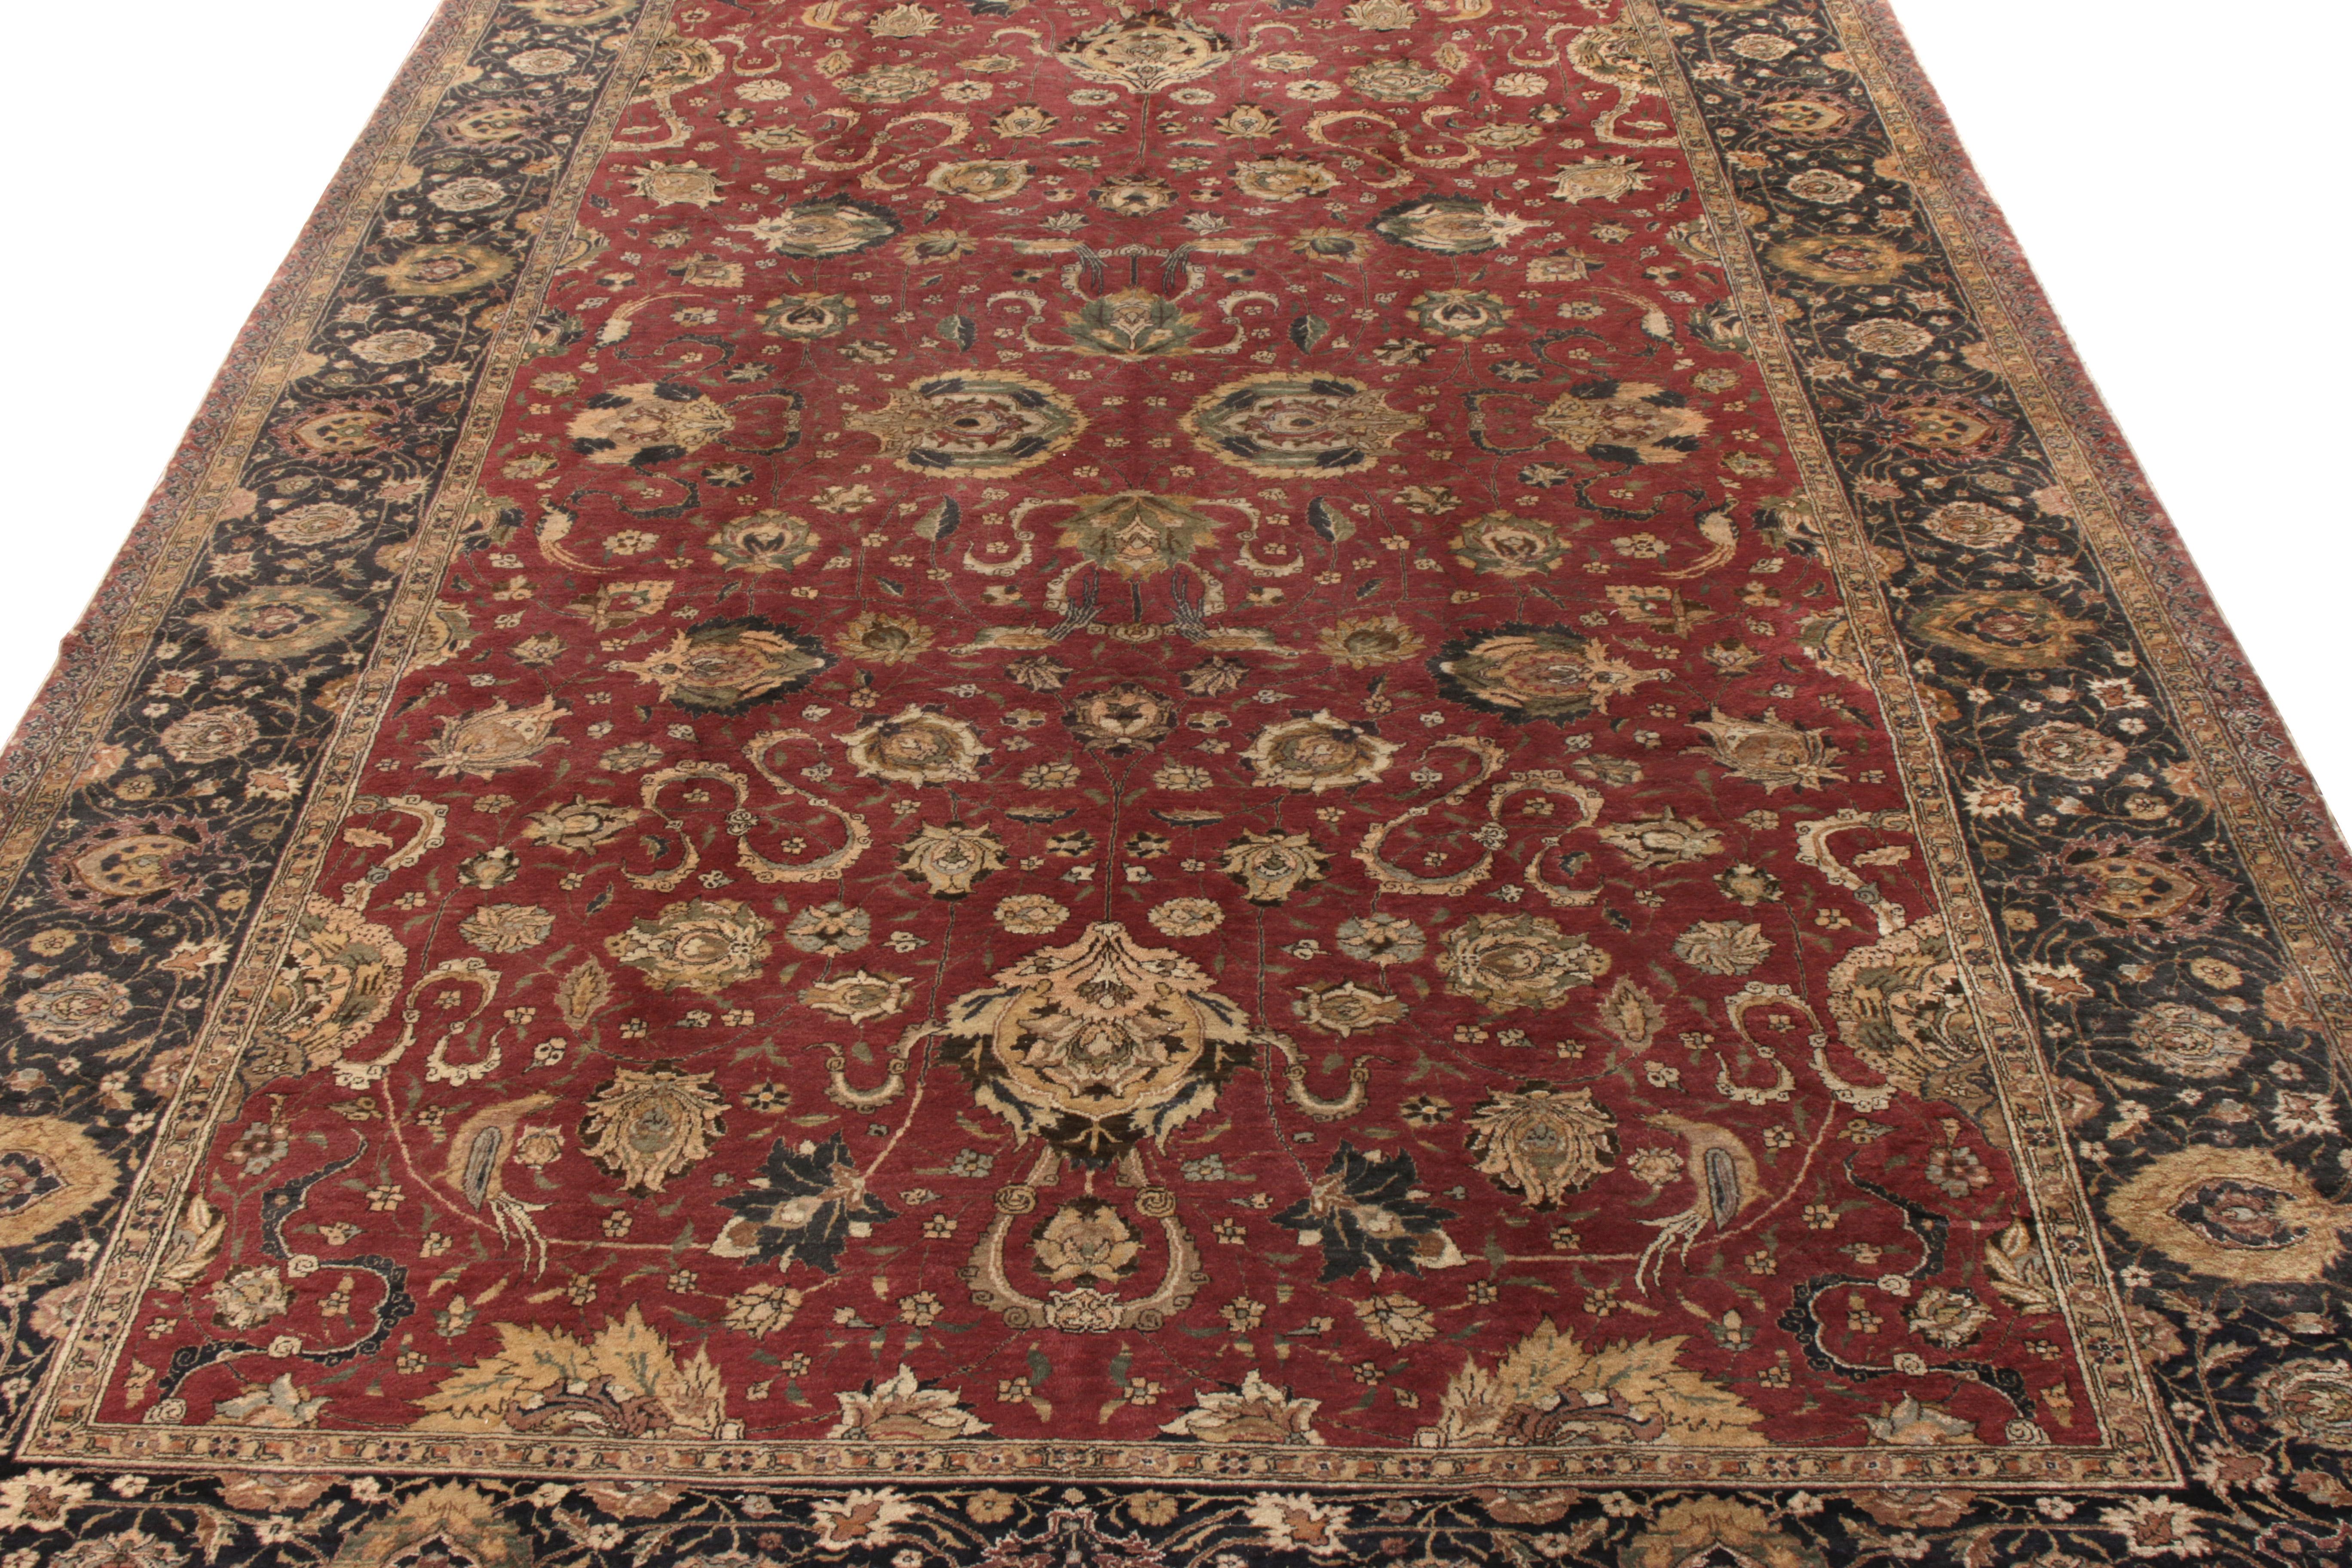 An 8x12 antique Hereke style rug originating circa 1920-1930, showcasing a fine blend of impeccable textural sensibilities with traditional design aesthetics. Inspired by the courtroom pieces of Persia & Ottoman Turkey, the rug sits in a luxurious